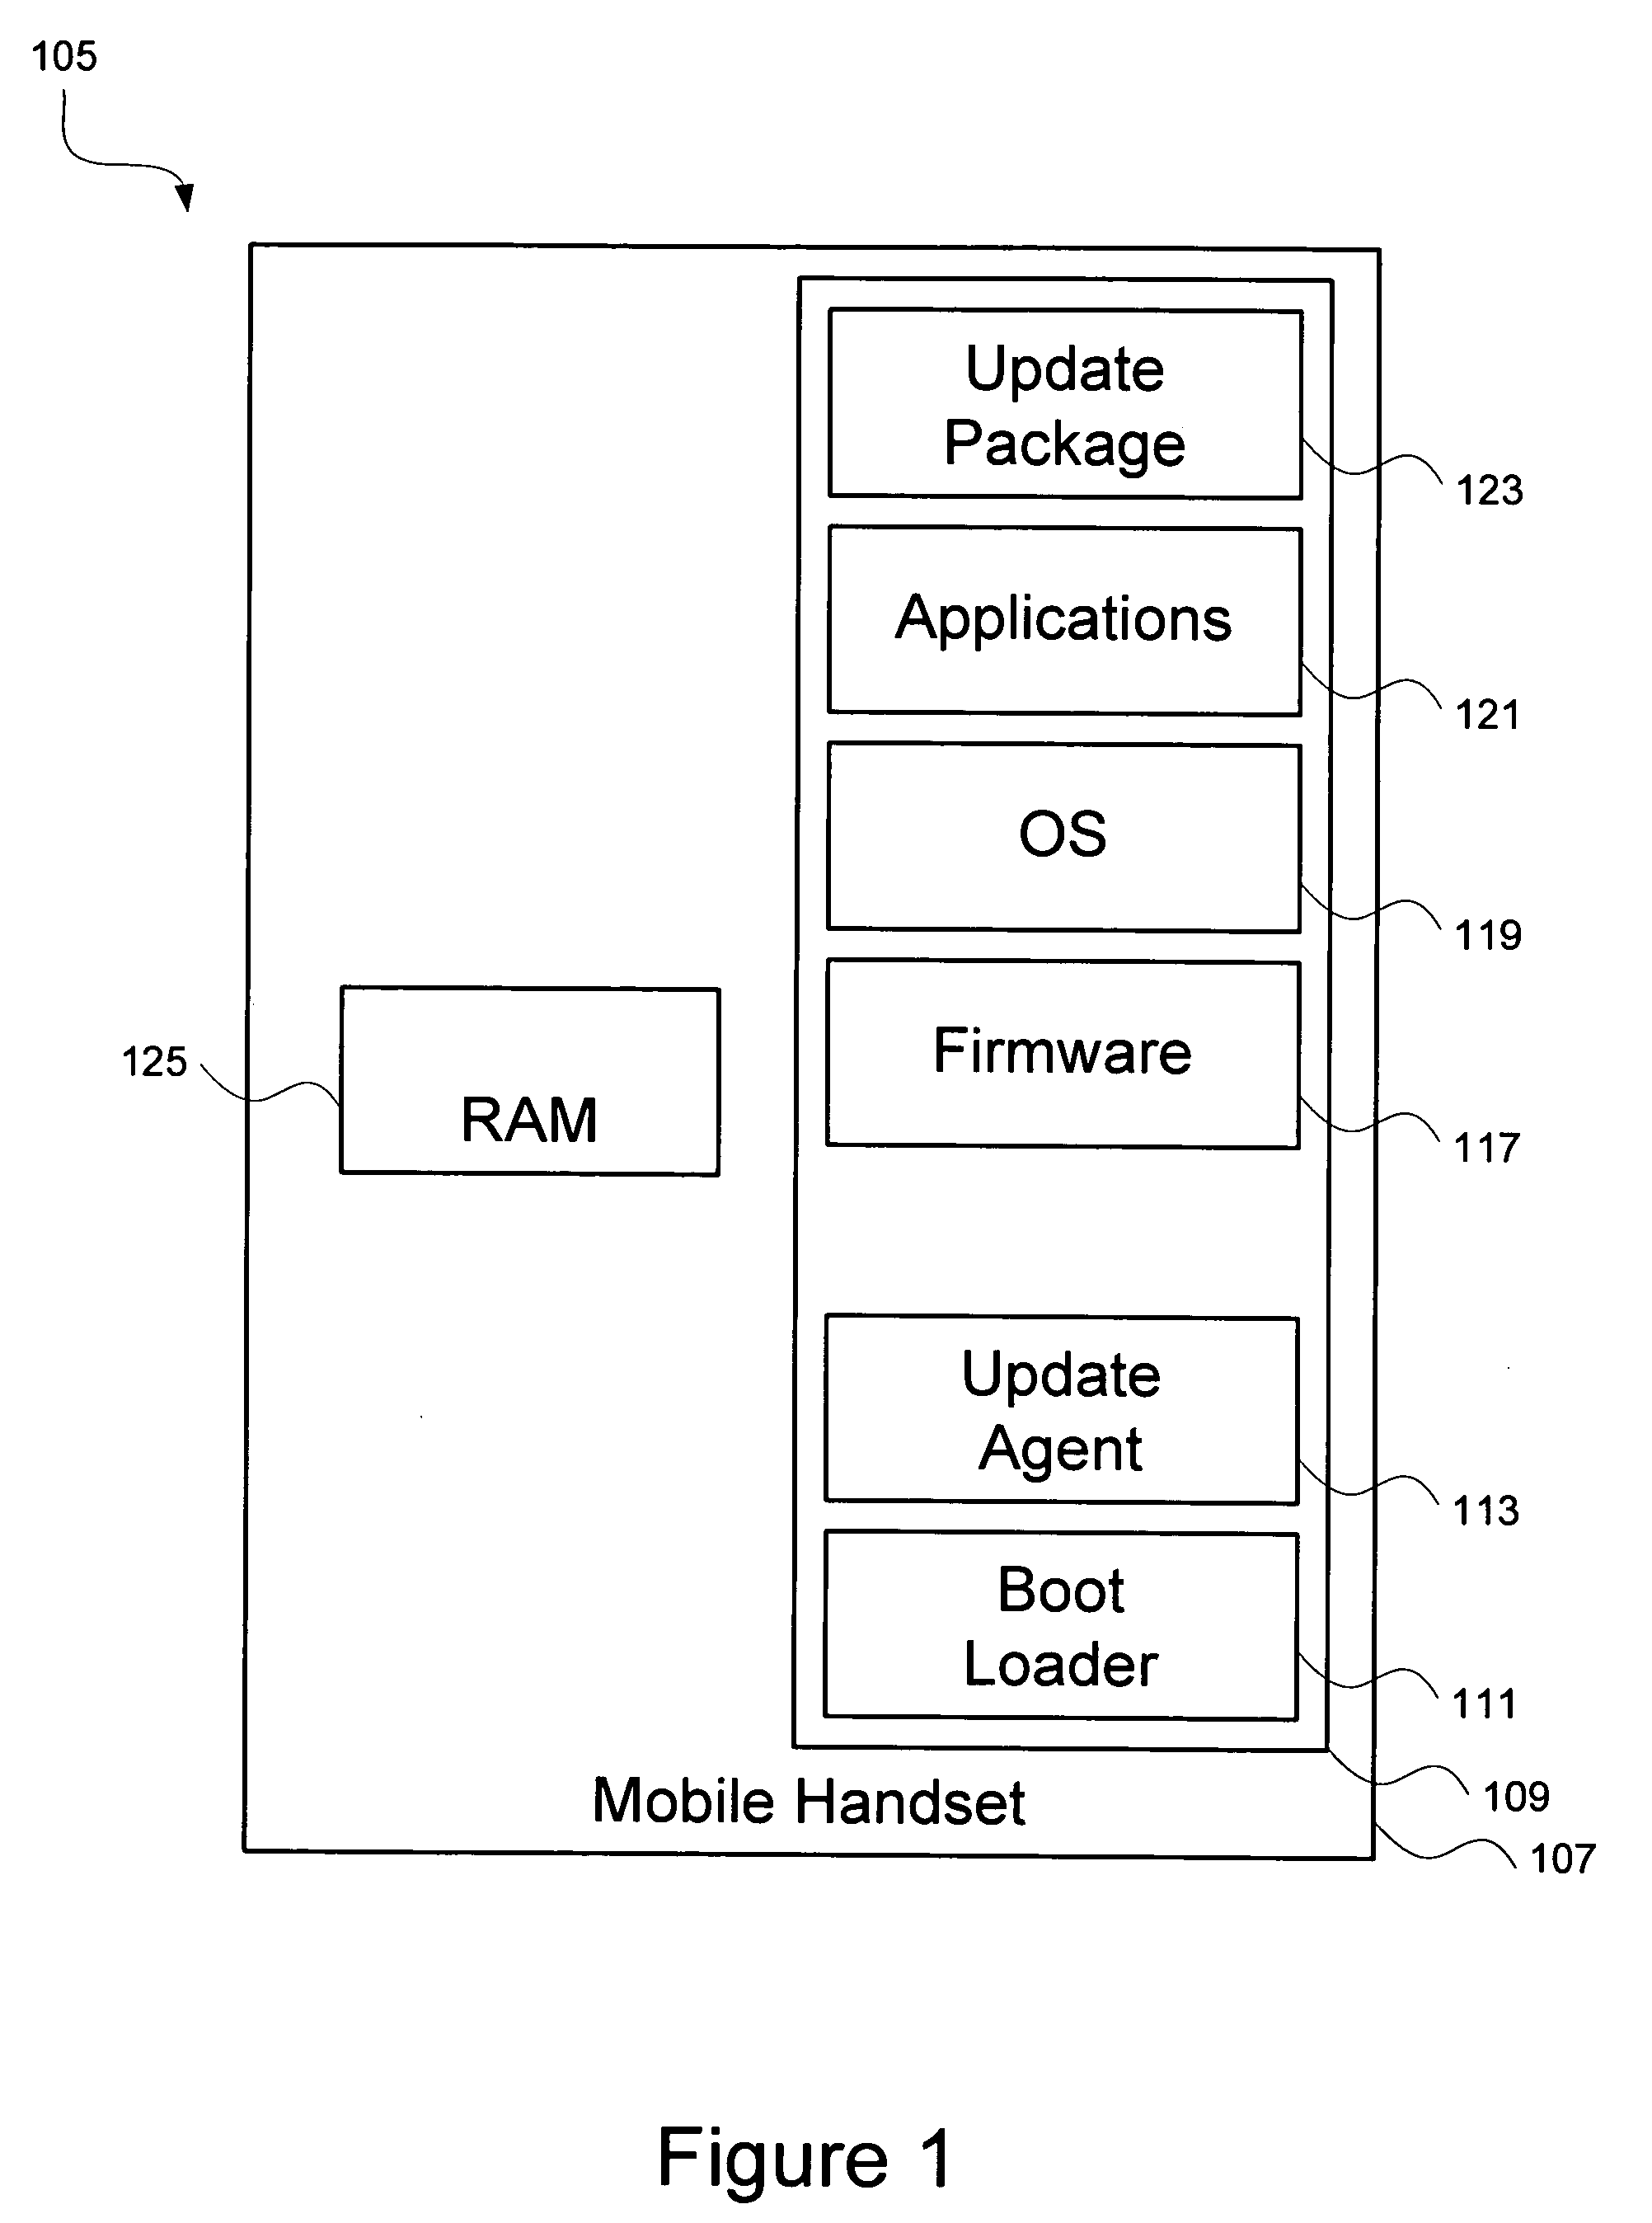 System and method for efficient manufacture and update of electronic devices